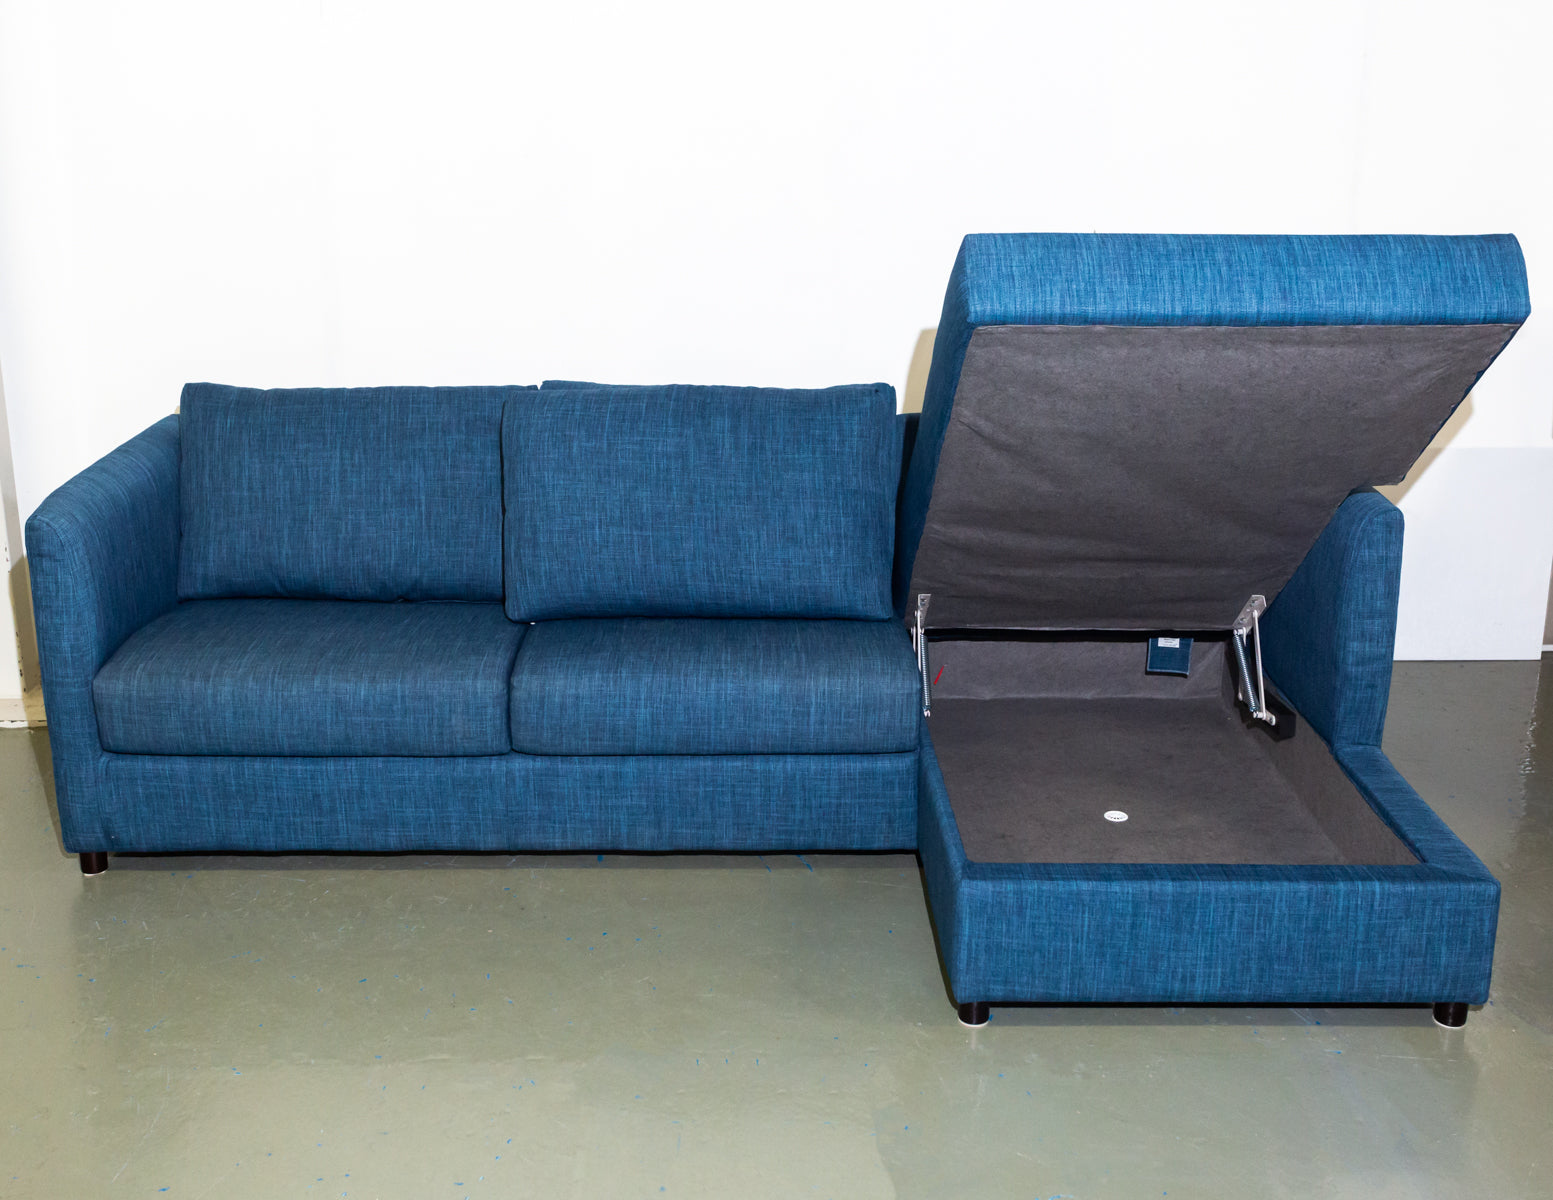 Made.Com Milner Chaise Sofa Bed With Storage